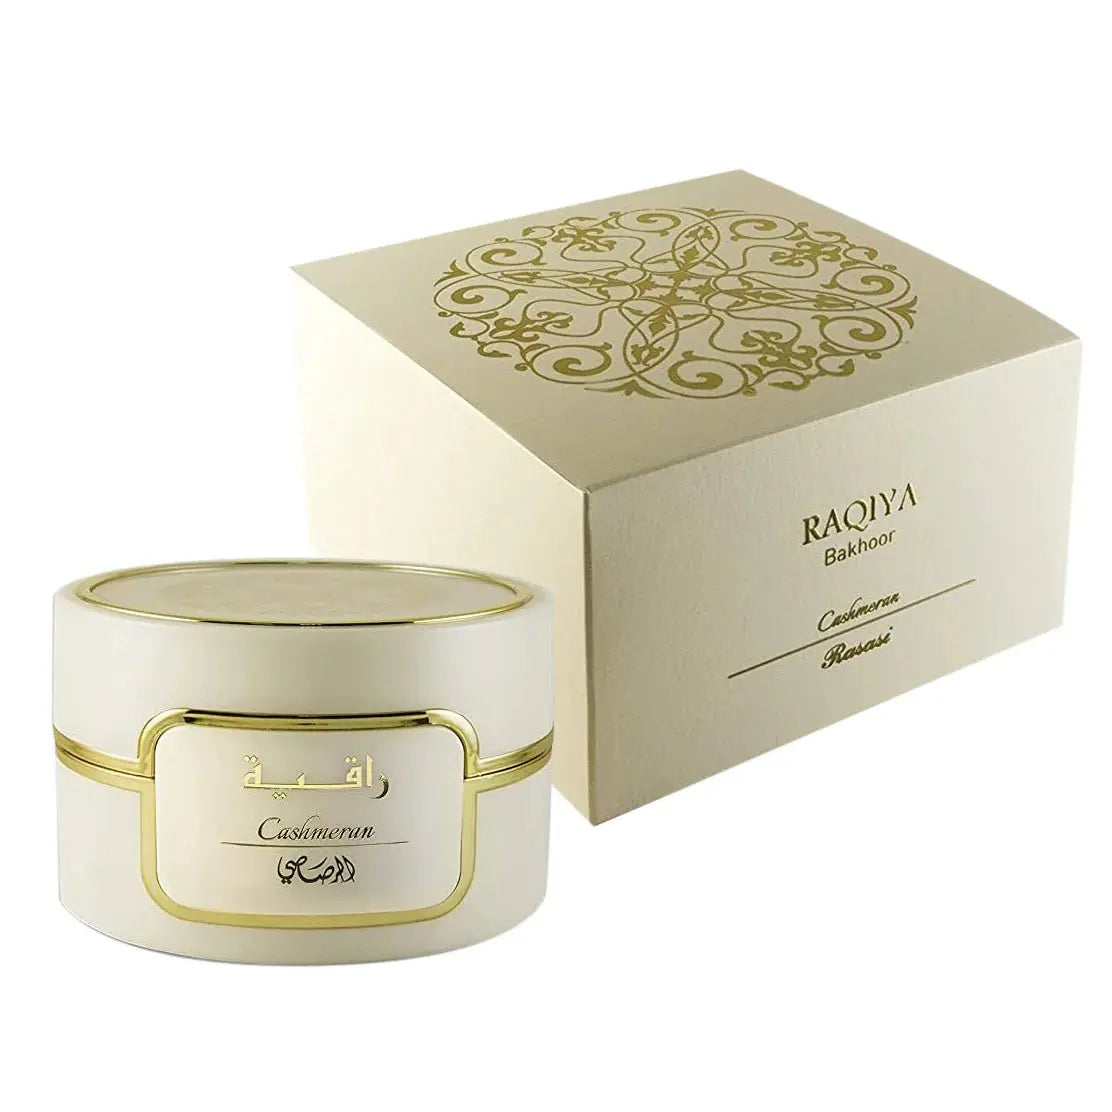 A creamy white jar with a golden rim and label sits in front of its matching box, which has a gold ornate design and the words "RAQIYA Bakhoor Cashmeran Rasasi" printed on it. This presentation suggests it is a premium bakhoor product, which are scented bricks or a blend of natural traditional ingredients, used in the Middle East to perfume the house and clothing.